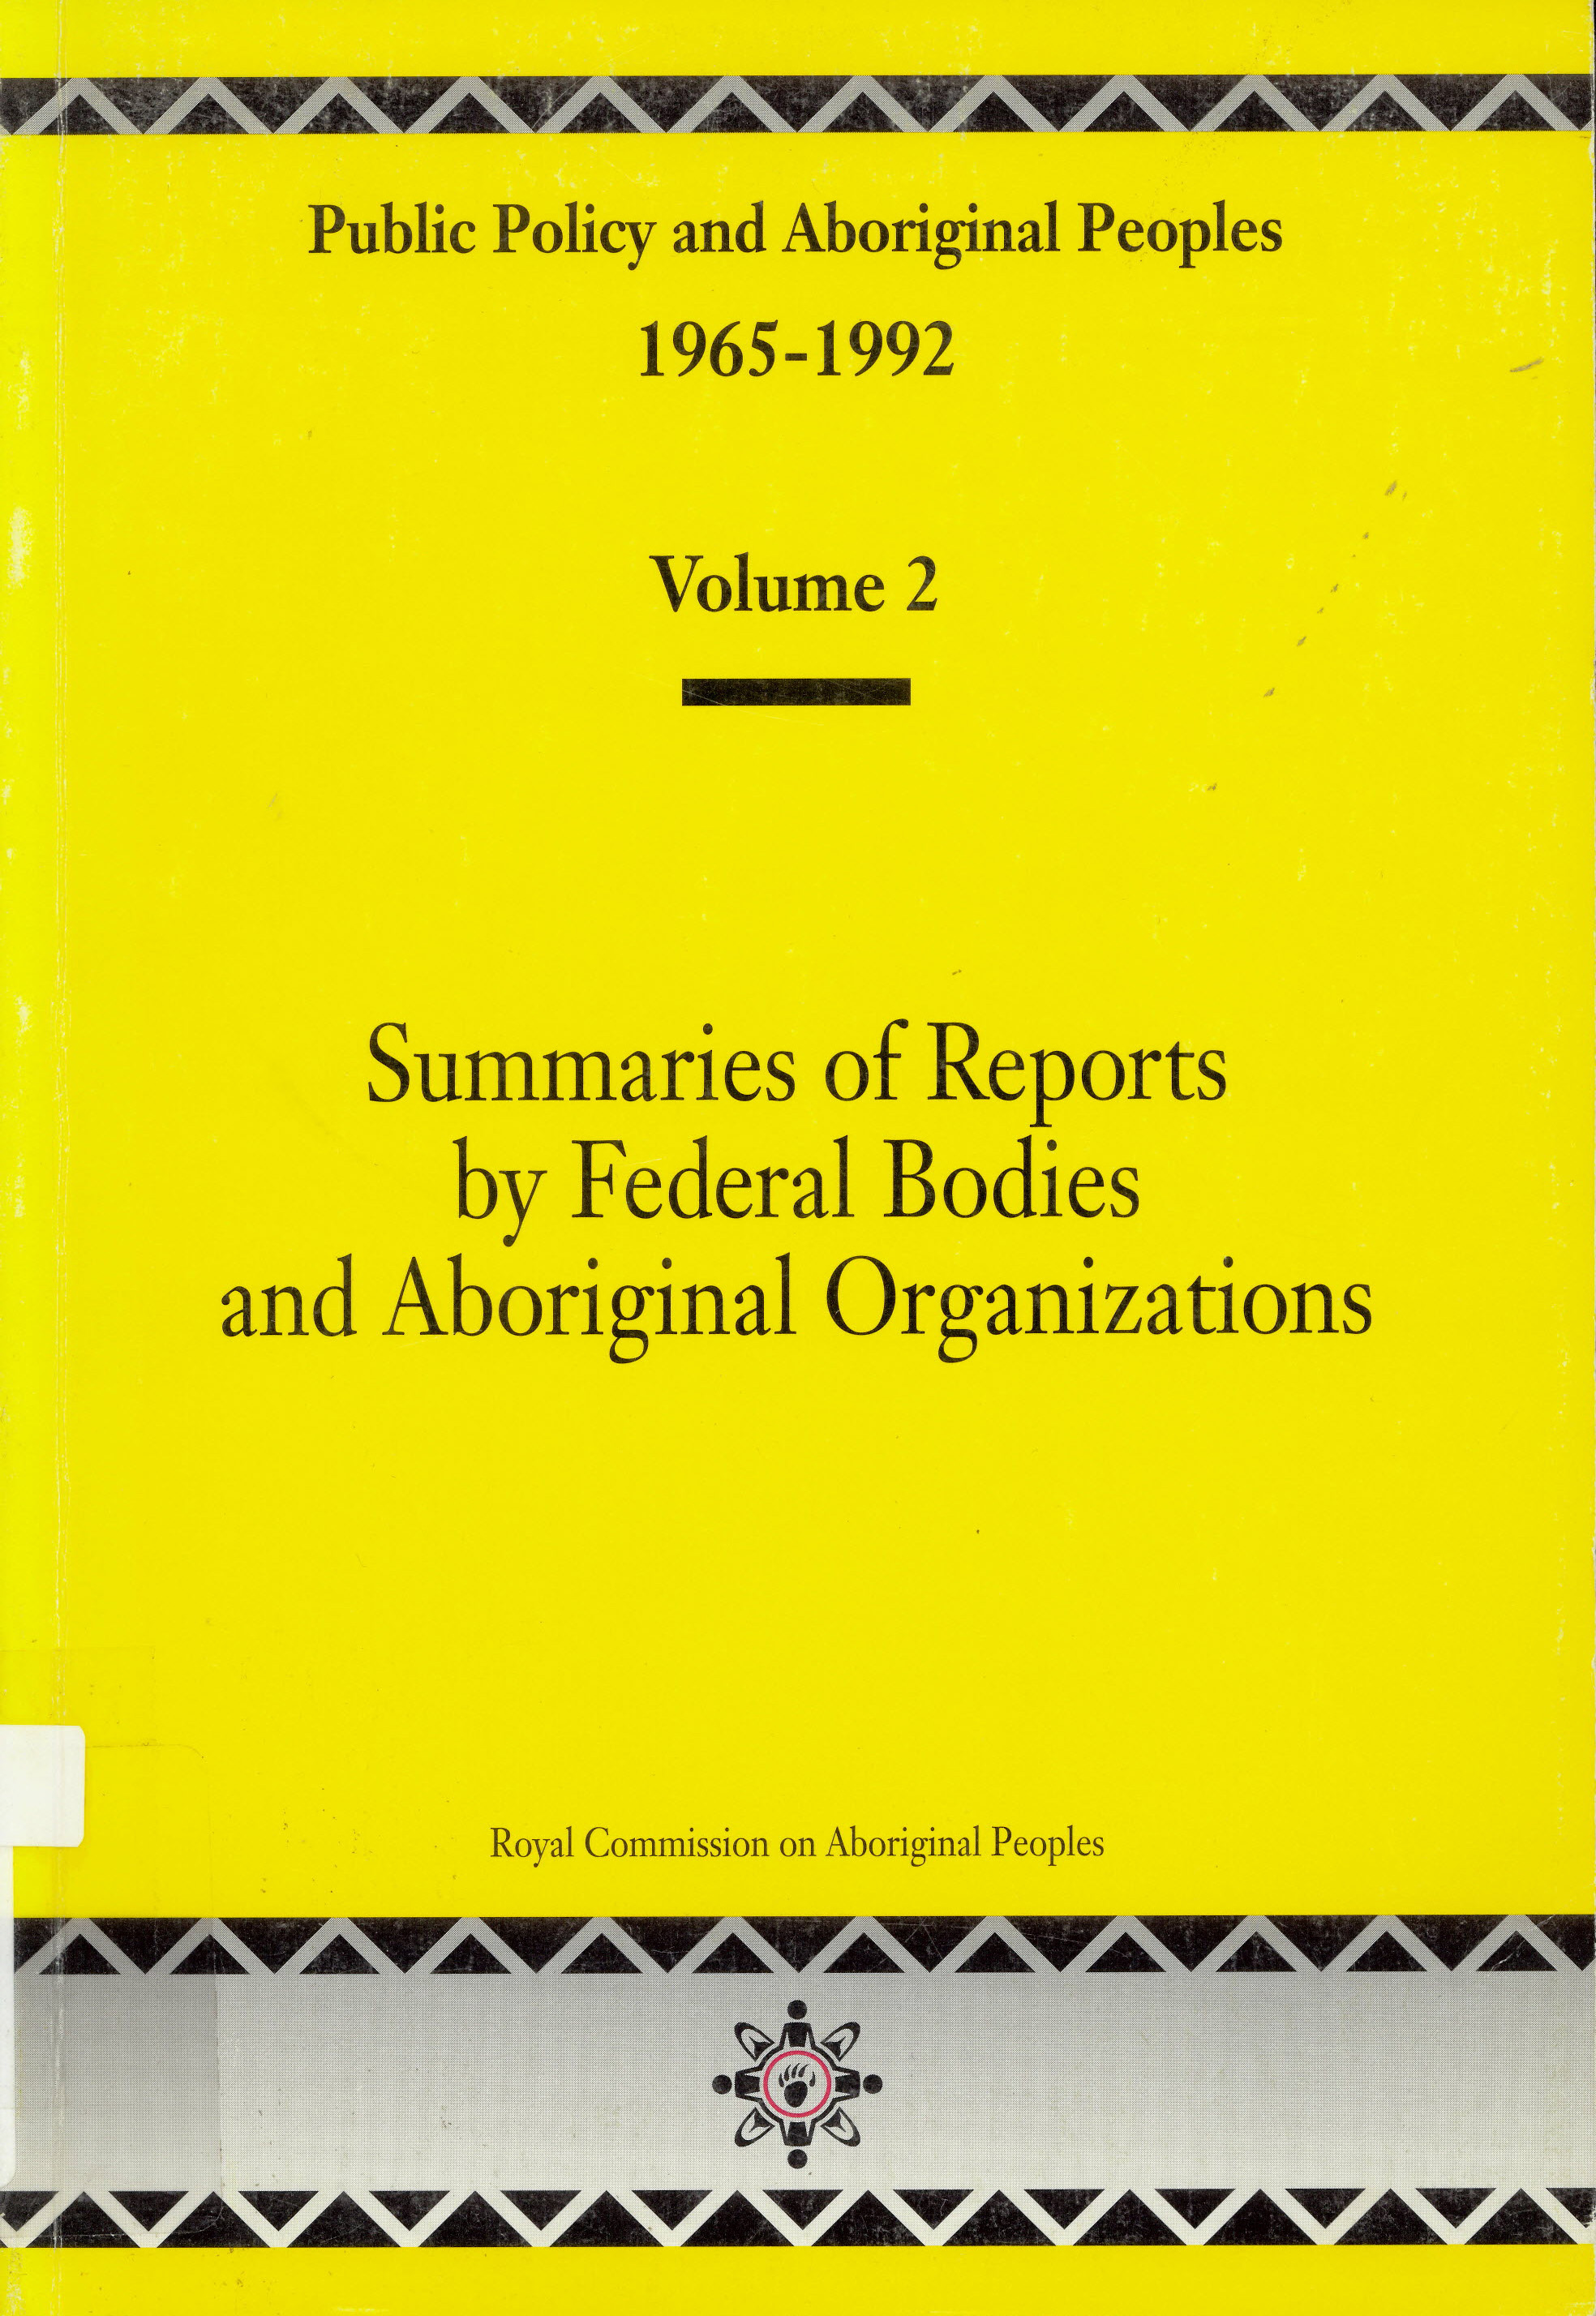 Public policy and aboriginal peoples, 1965-1992 : Volume 2, summaries of reports by federal bodies a